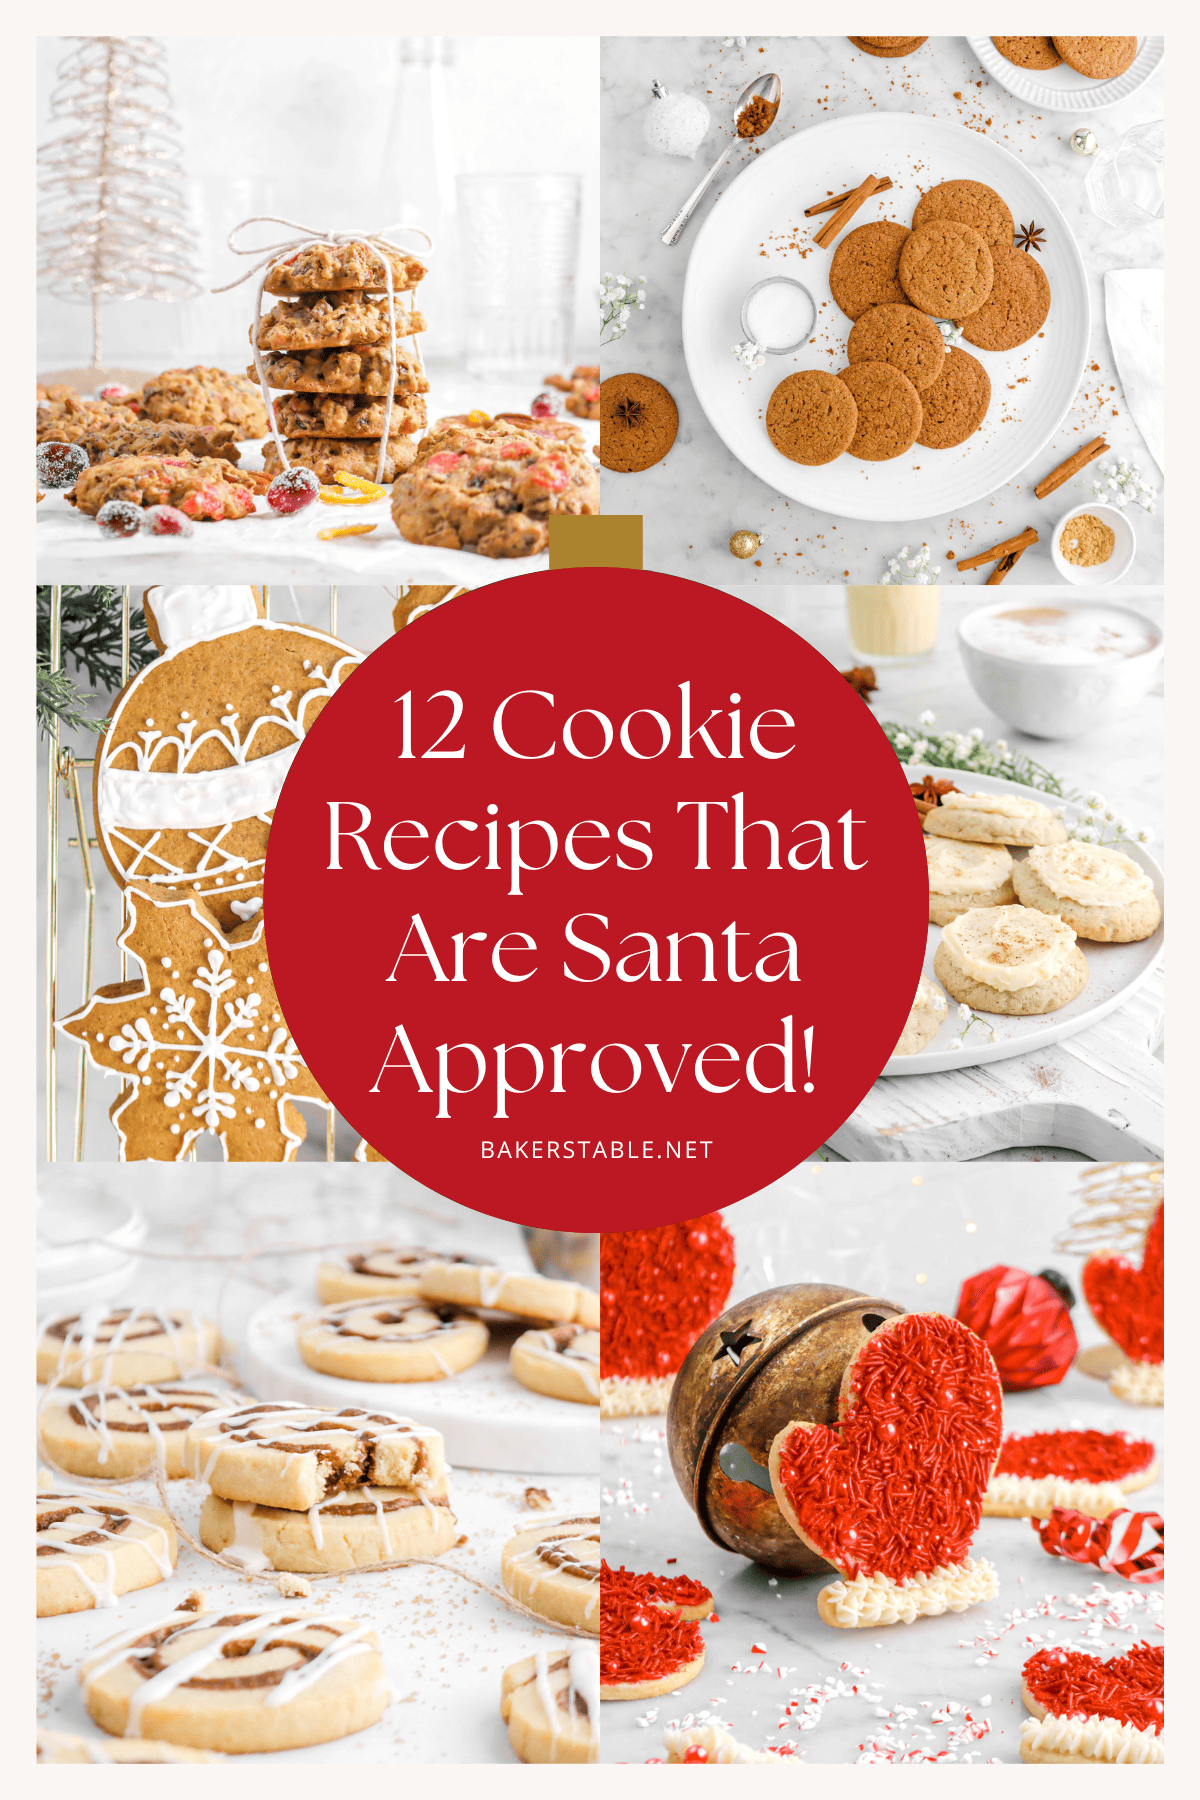 12 Christmas Cookie Recipes That Are Santa Approved!